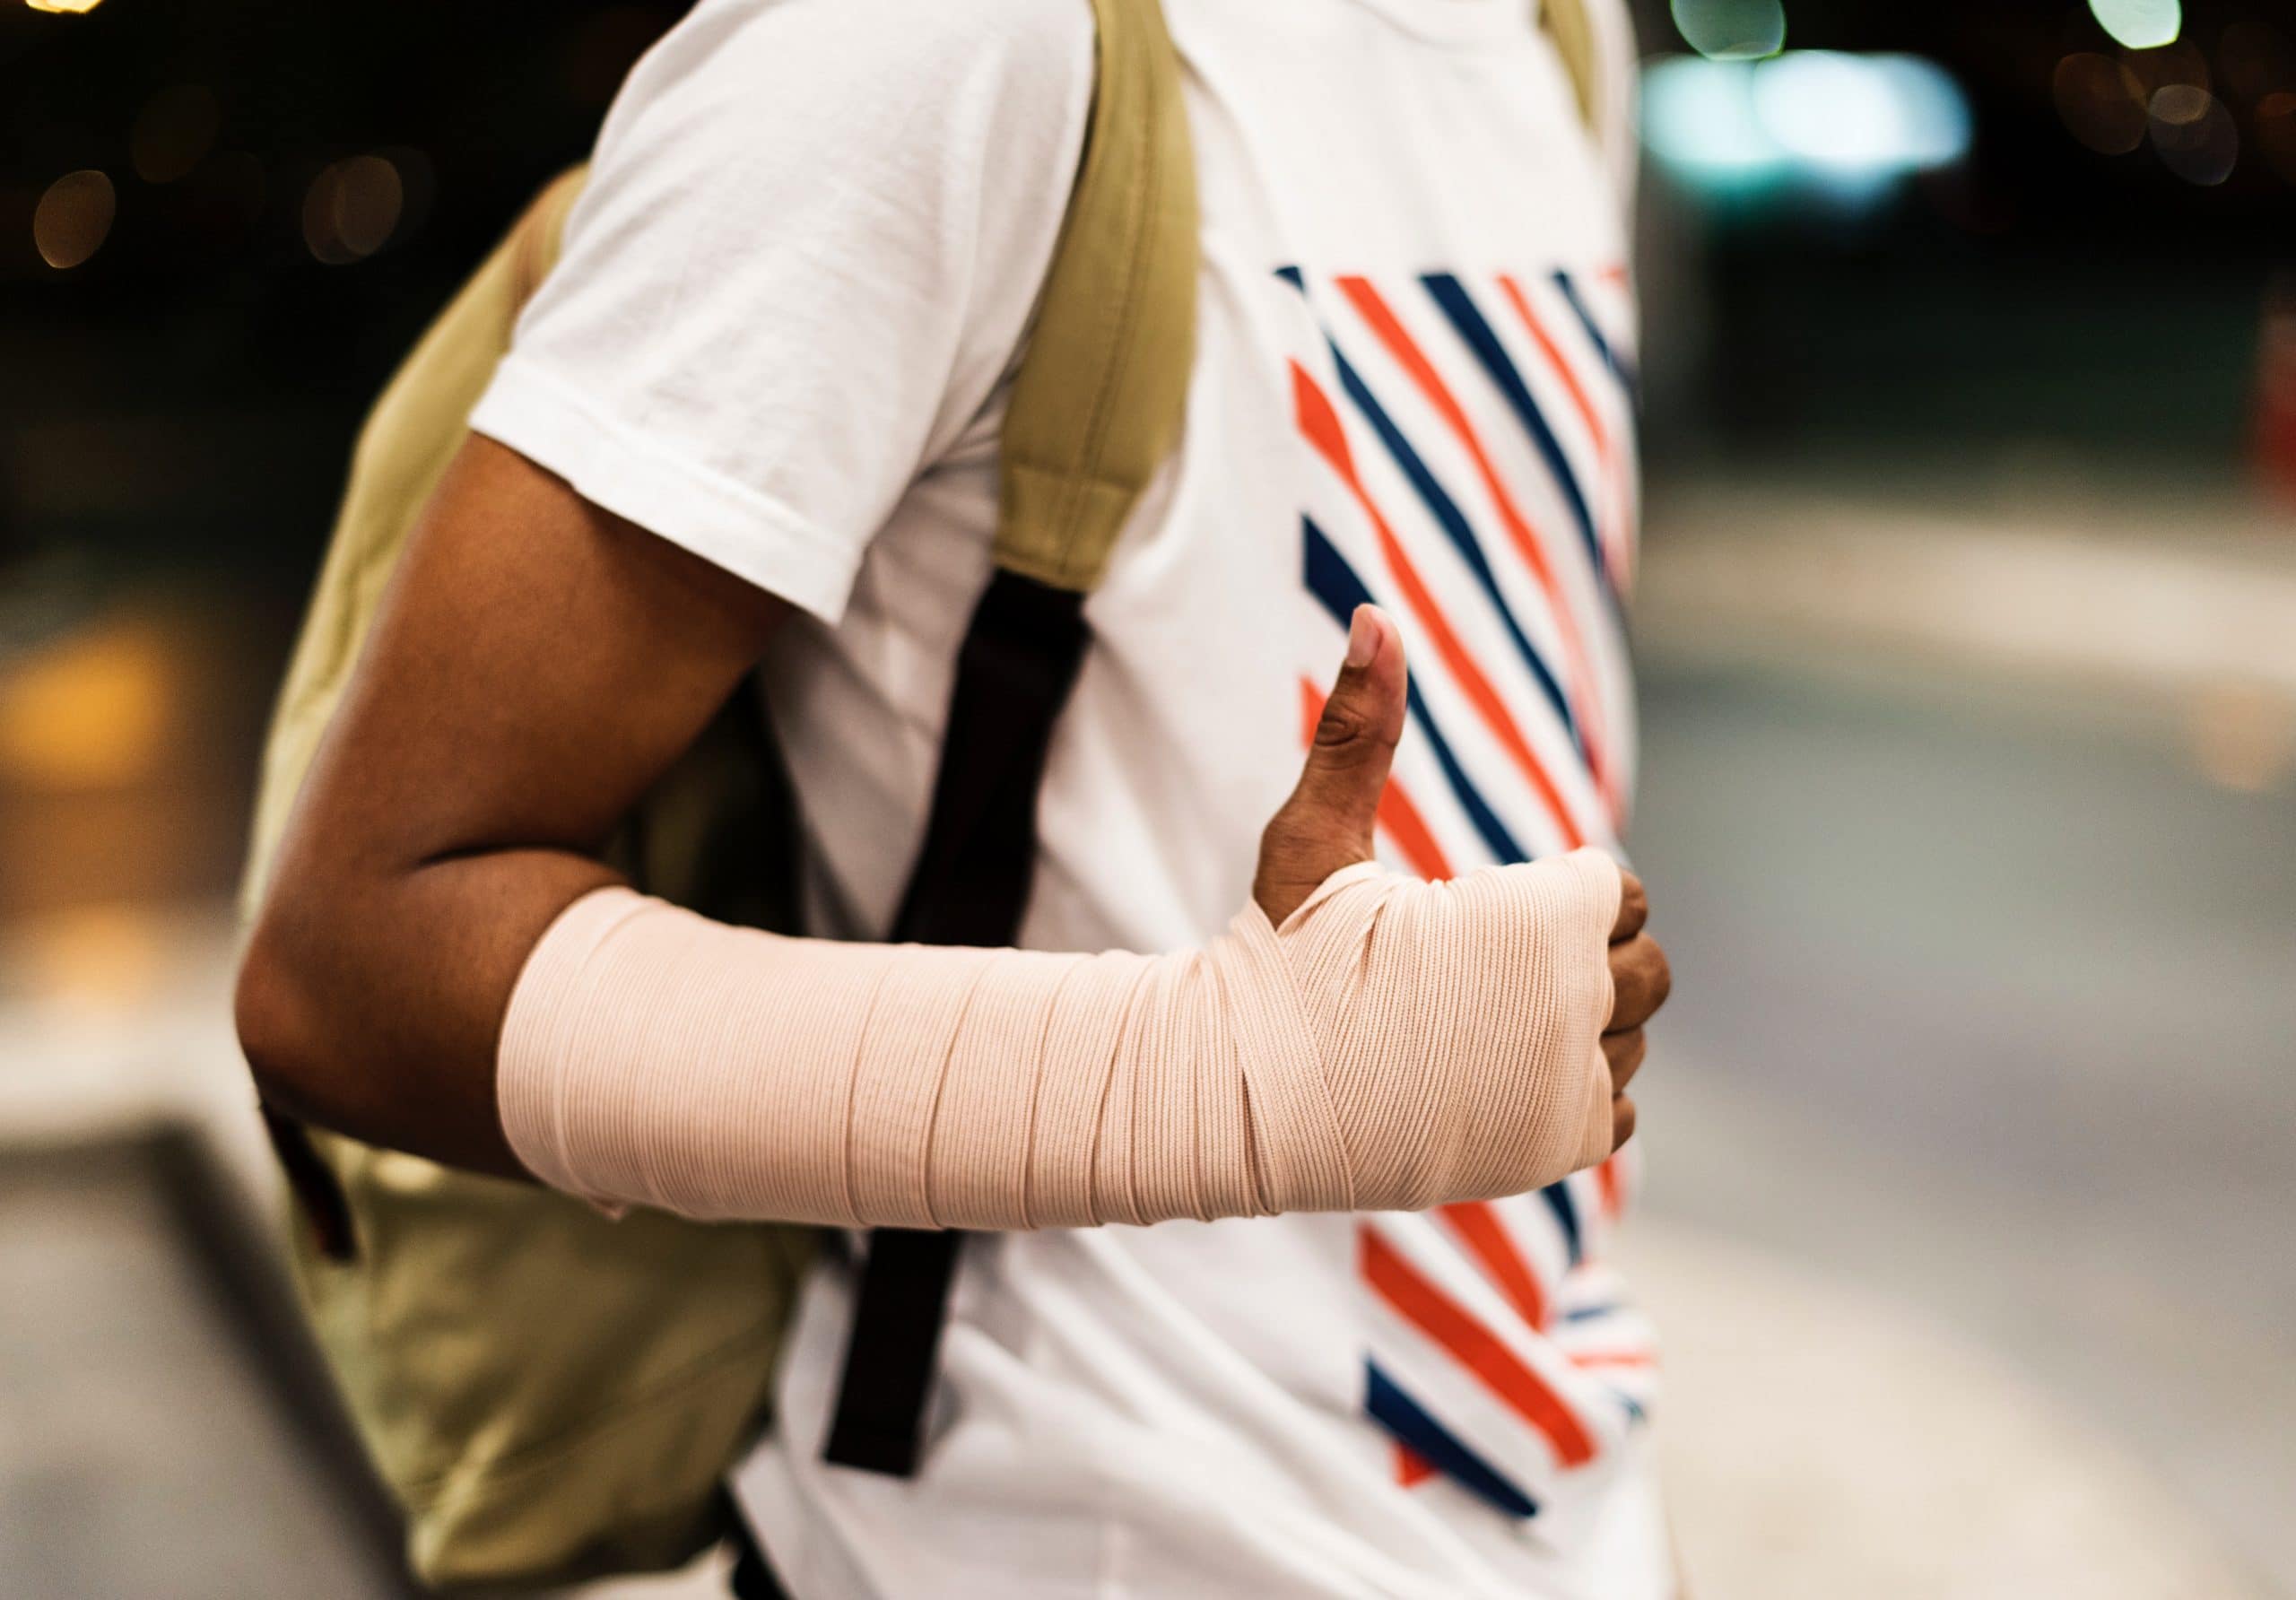 A man with his arm wrapped following a workplace injury